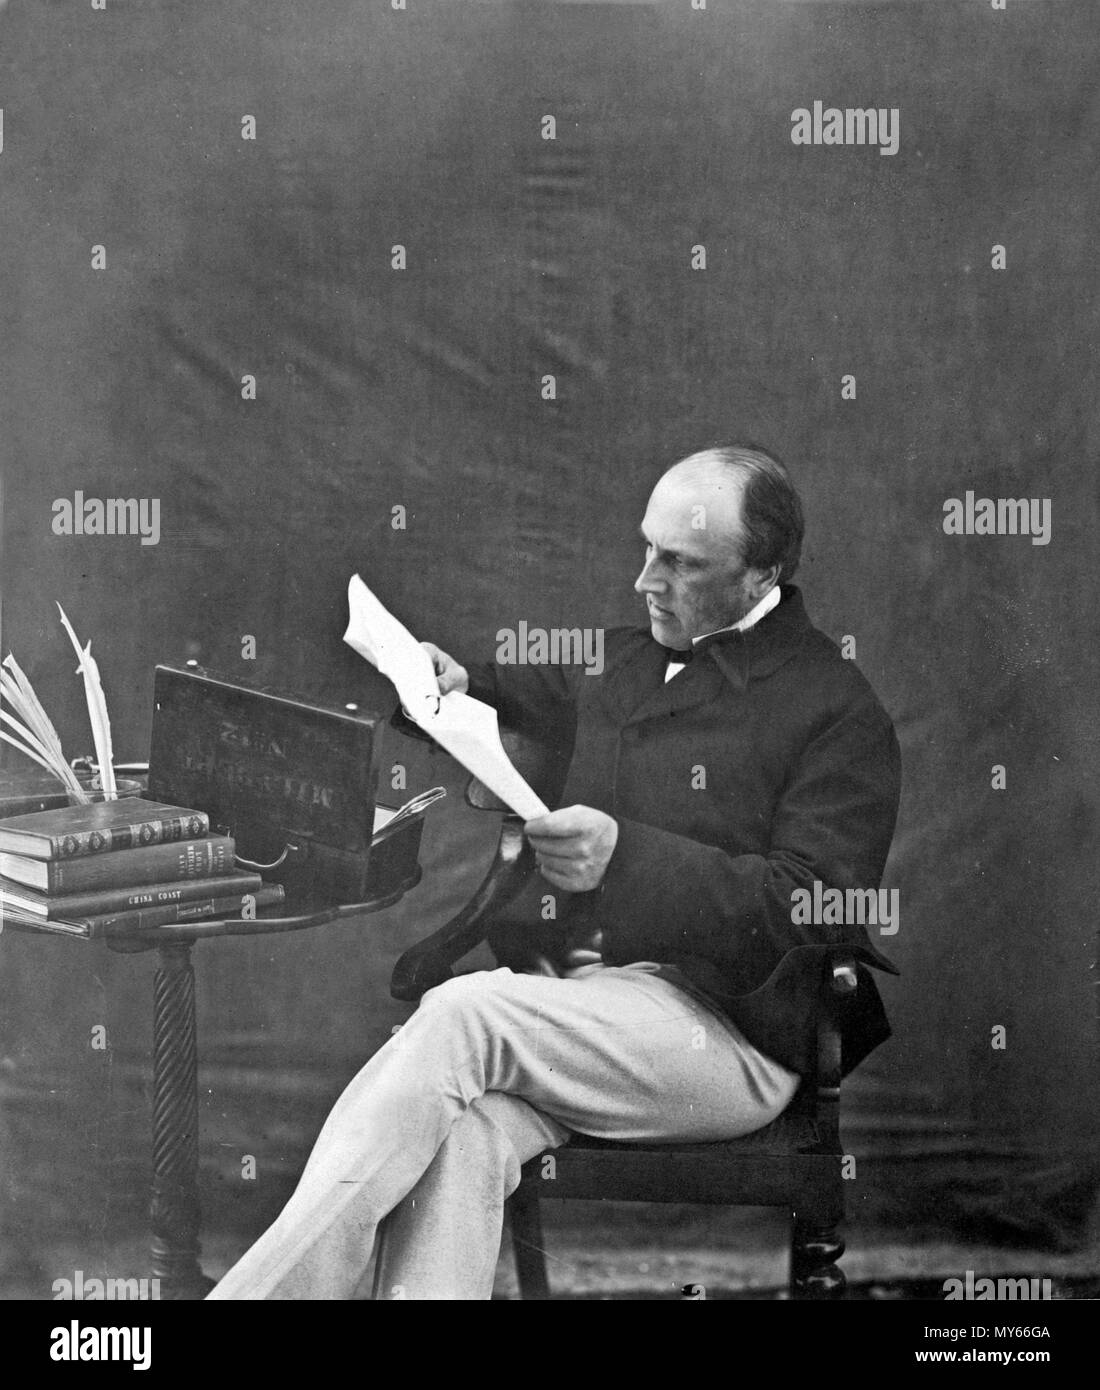 . English: [Lord Canning, Viceroy and Governor General of India, from March 1856 to March 1862] Unknown Artist Date:  1860 Medium:  Albumen silver print from glass negative Dimensions:  Image: 24.1 x 20.9 cm (9 1/2 x 8 1/4 in.) Mount: 33 x 26.4 cm (13 x 10 3/8 in.) Mount (2nd): 30.5 x 24.7 cm (12 x 9 3/4 in.) Classification:  Photographs Credit Line:  Gilman Collection, Purchase, Cynthia Hazen Polsky Gift, 2005 Accession Number:  2005.100.491.1 (1) This artwork is not on display . 1860. Unknown 328 Lord Canning, Viceroy and Governor General of India, from March 1856 to March 1862 Stock Photo